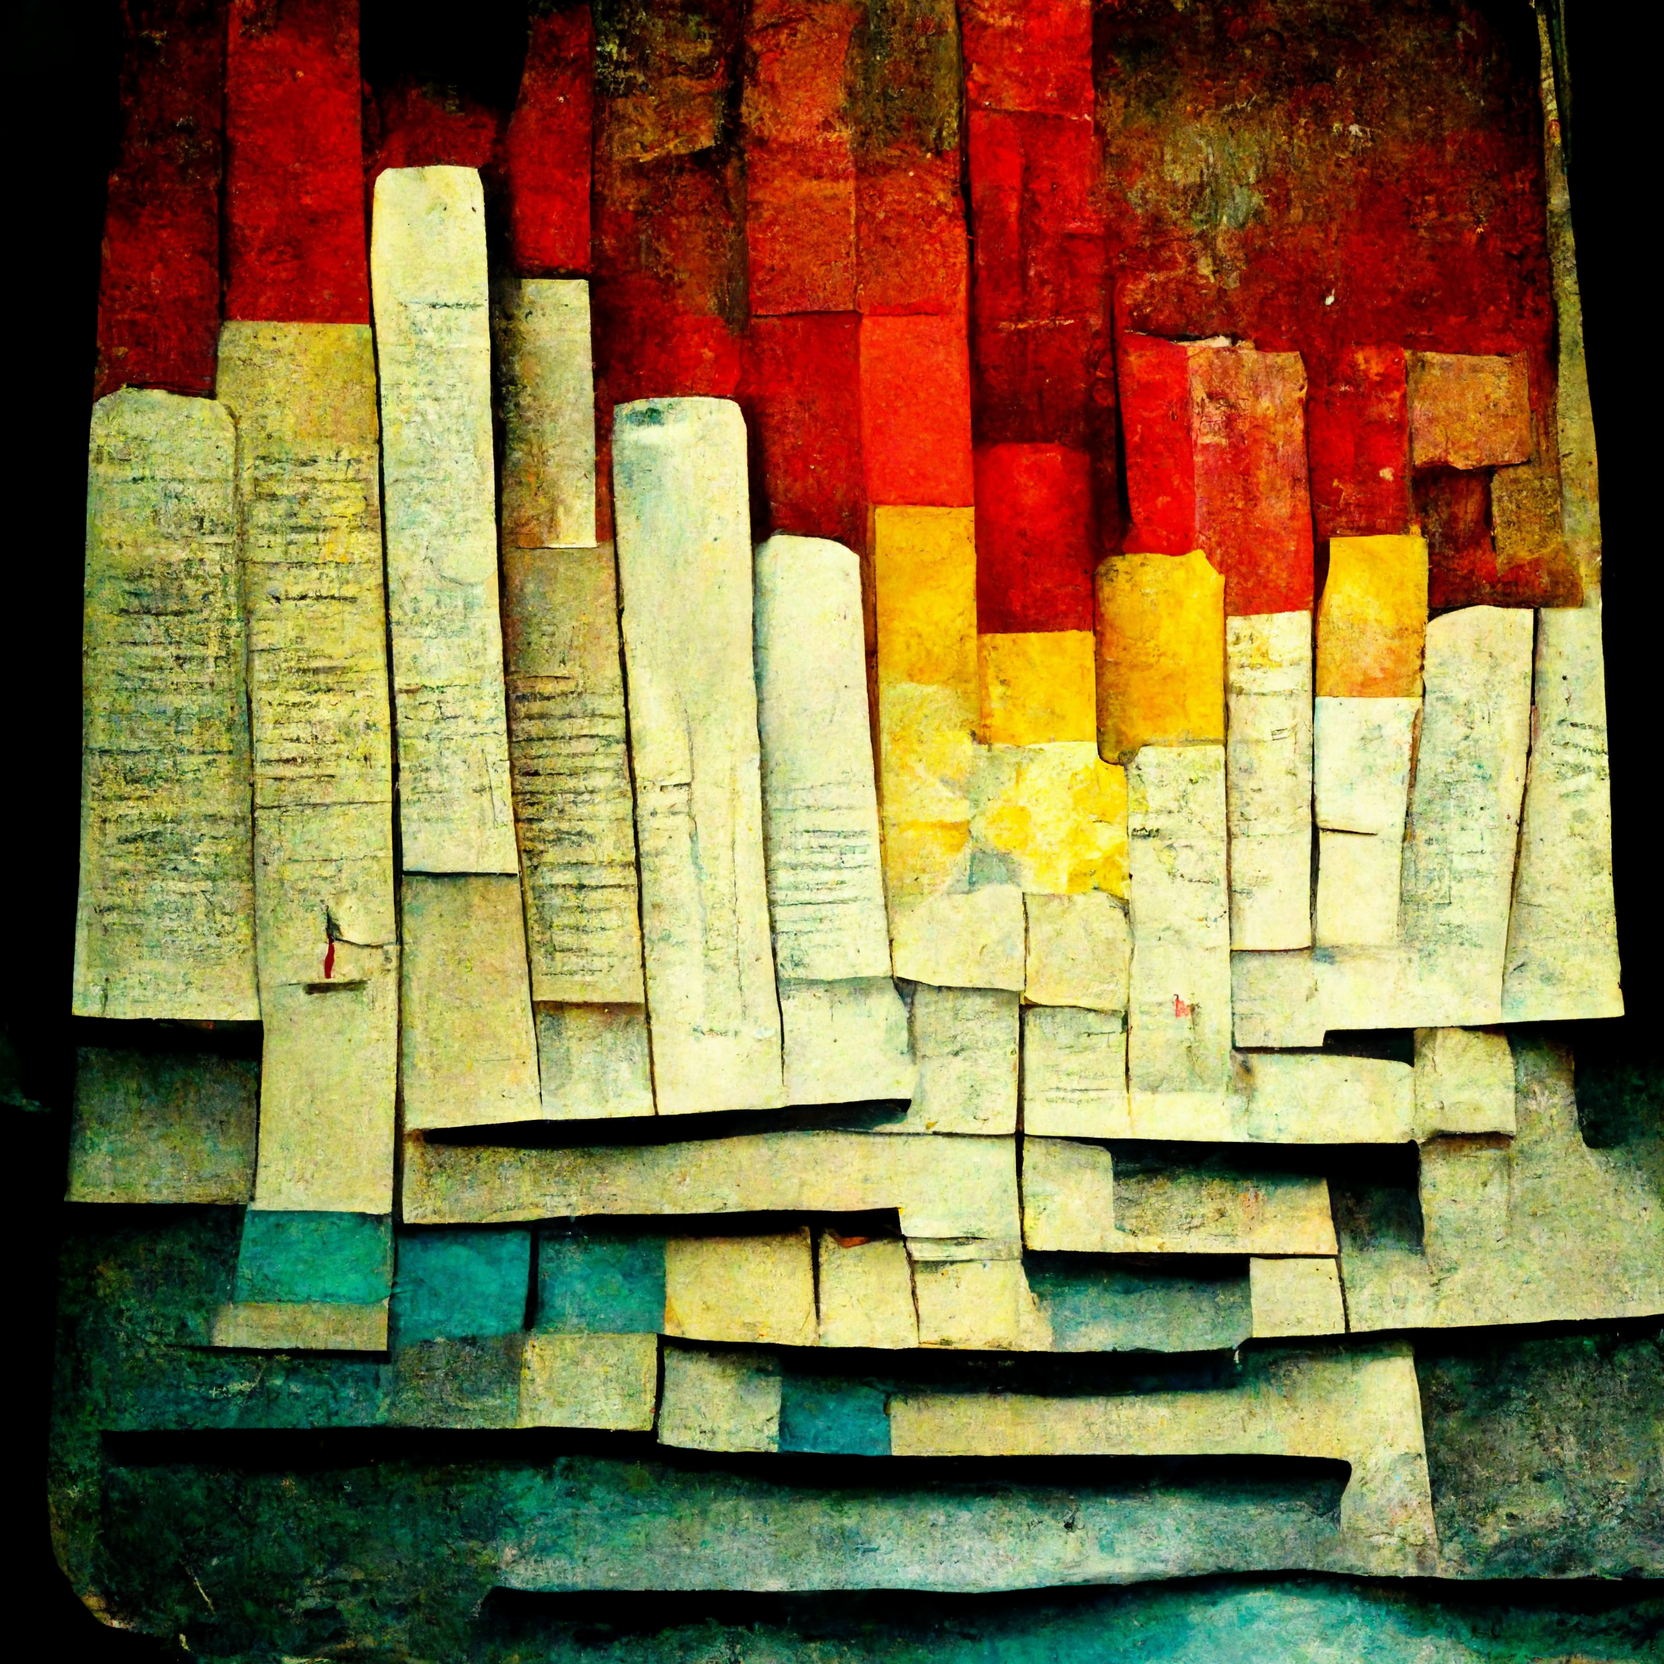 Filipino Poetry review by Luis G. Dato